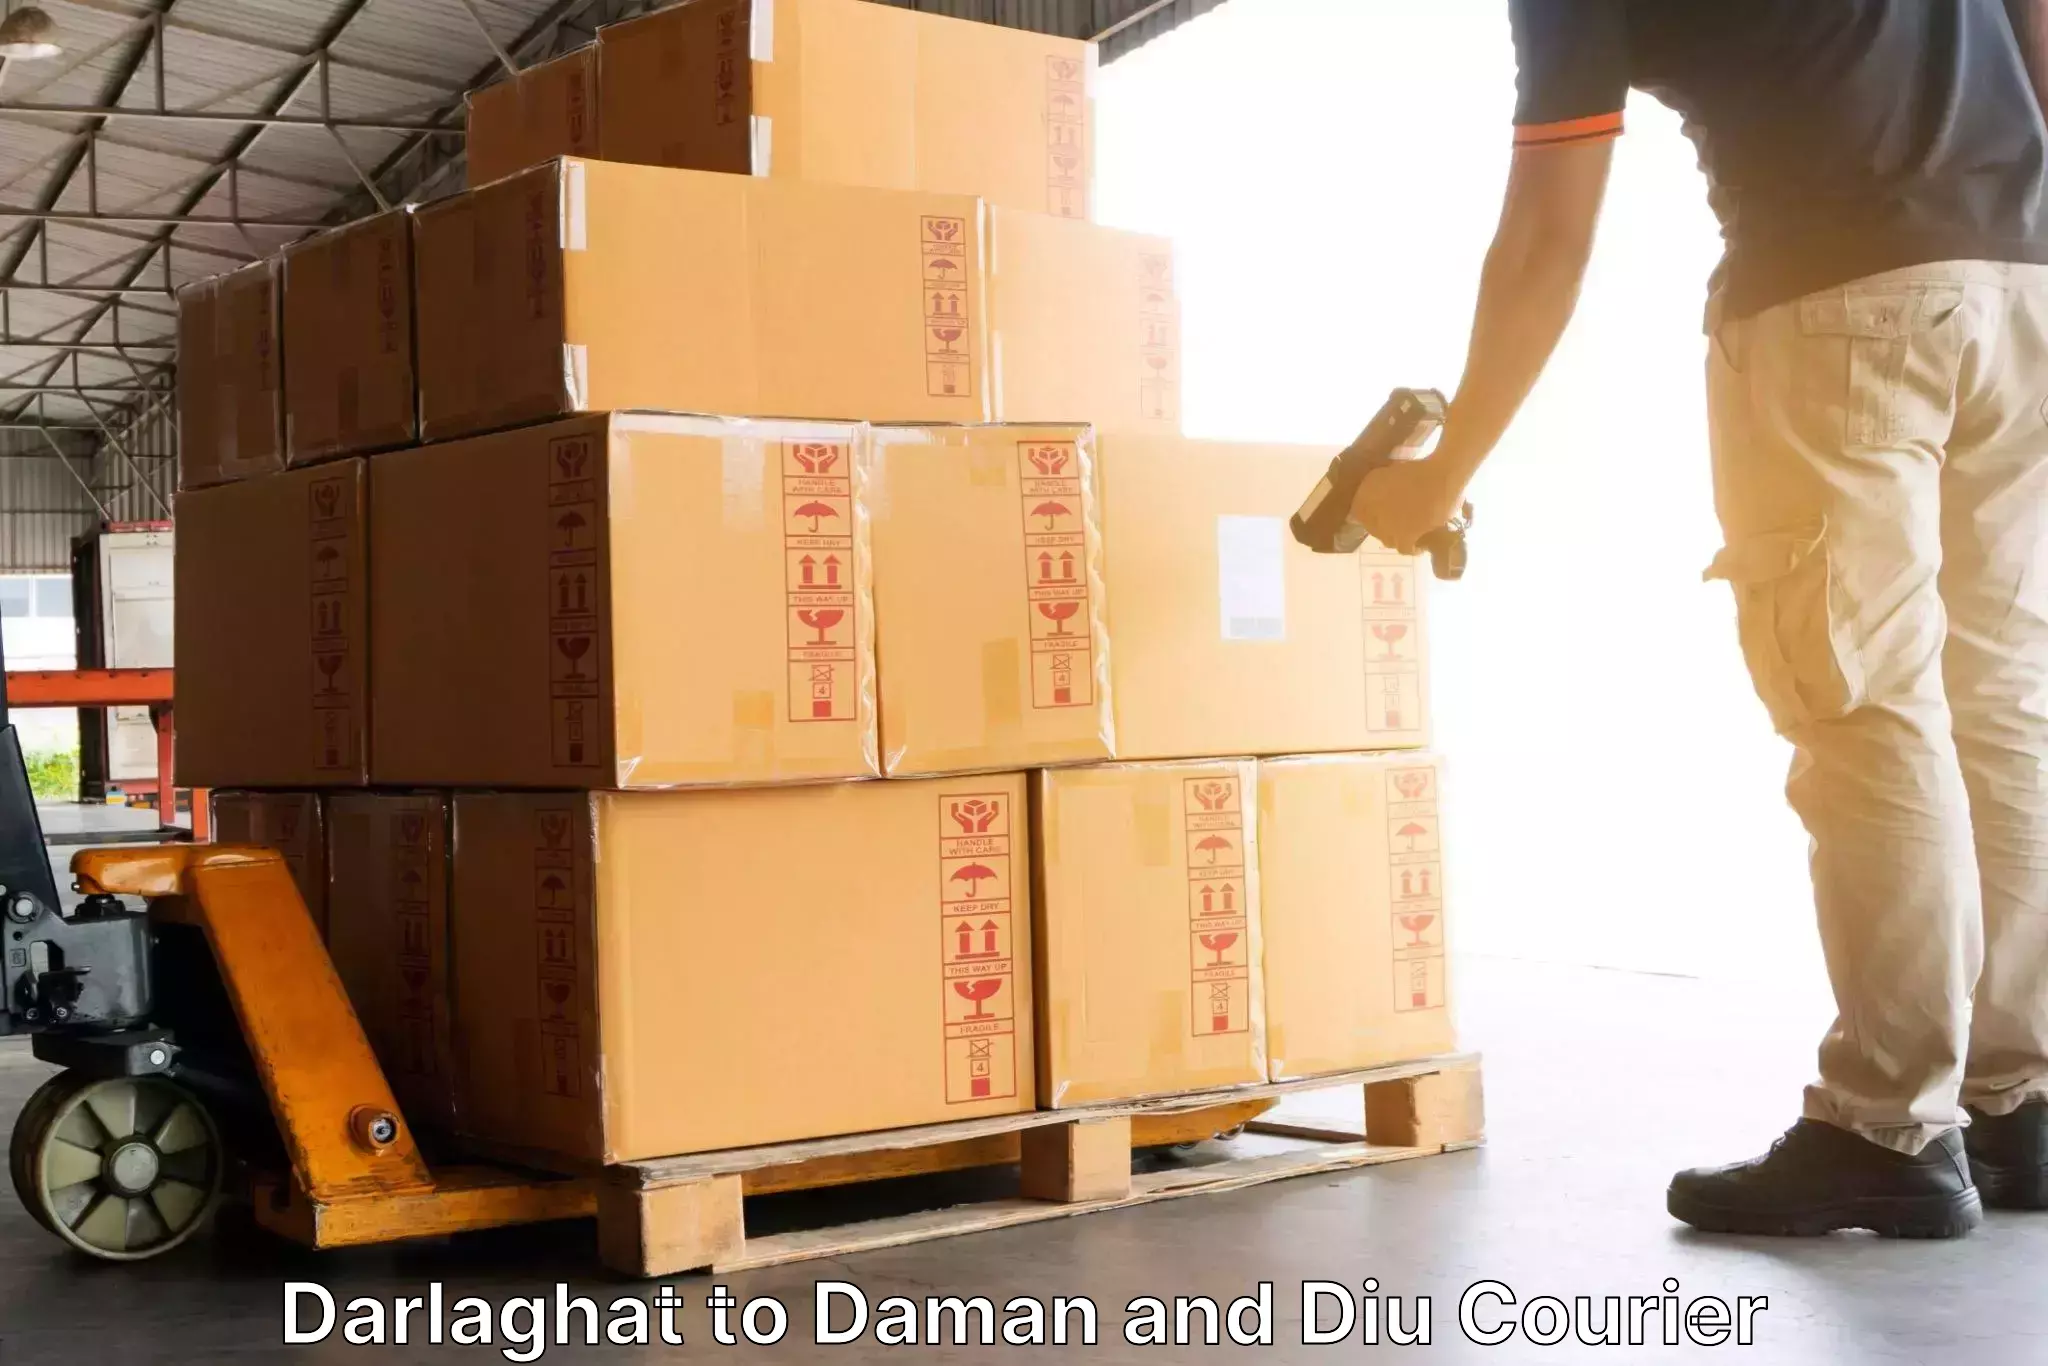 Express delivery capabilities Darlaghat to Daman and Diu